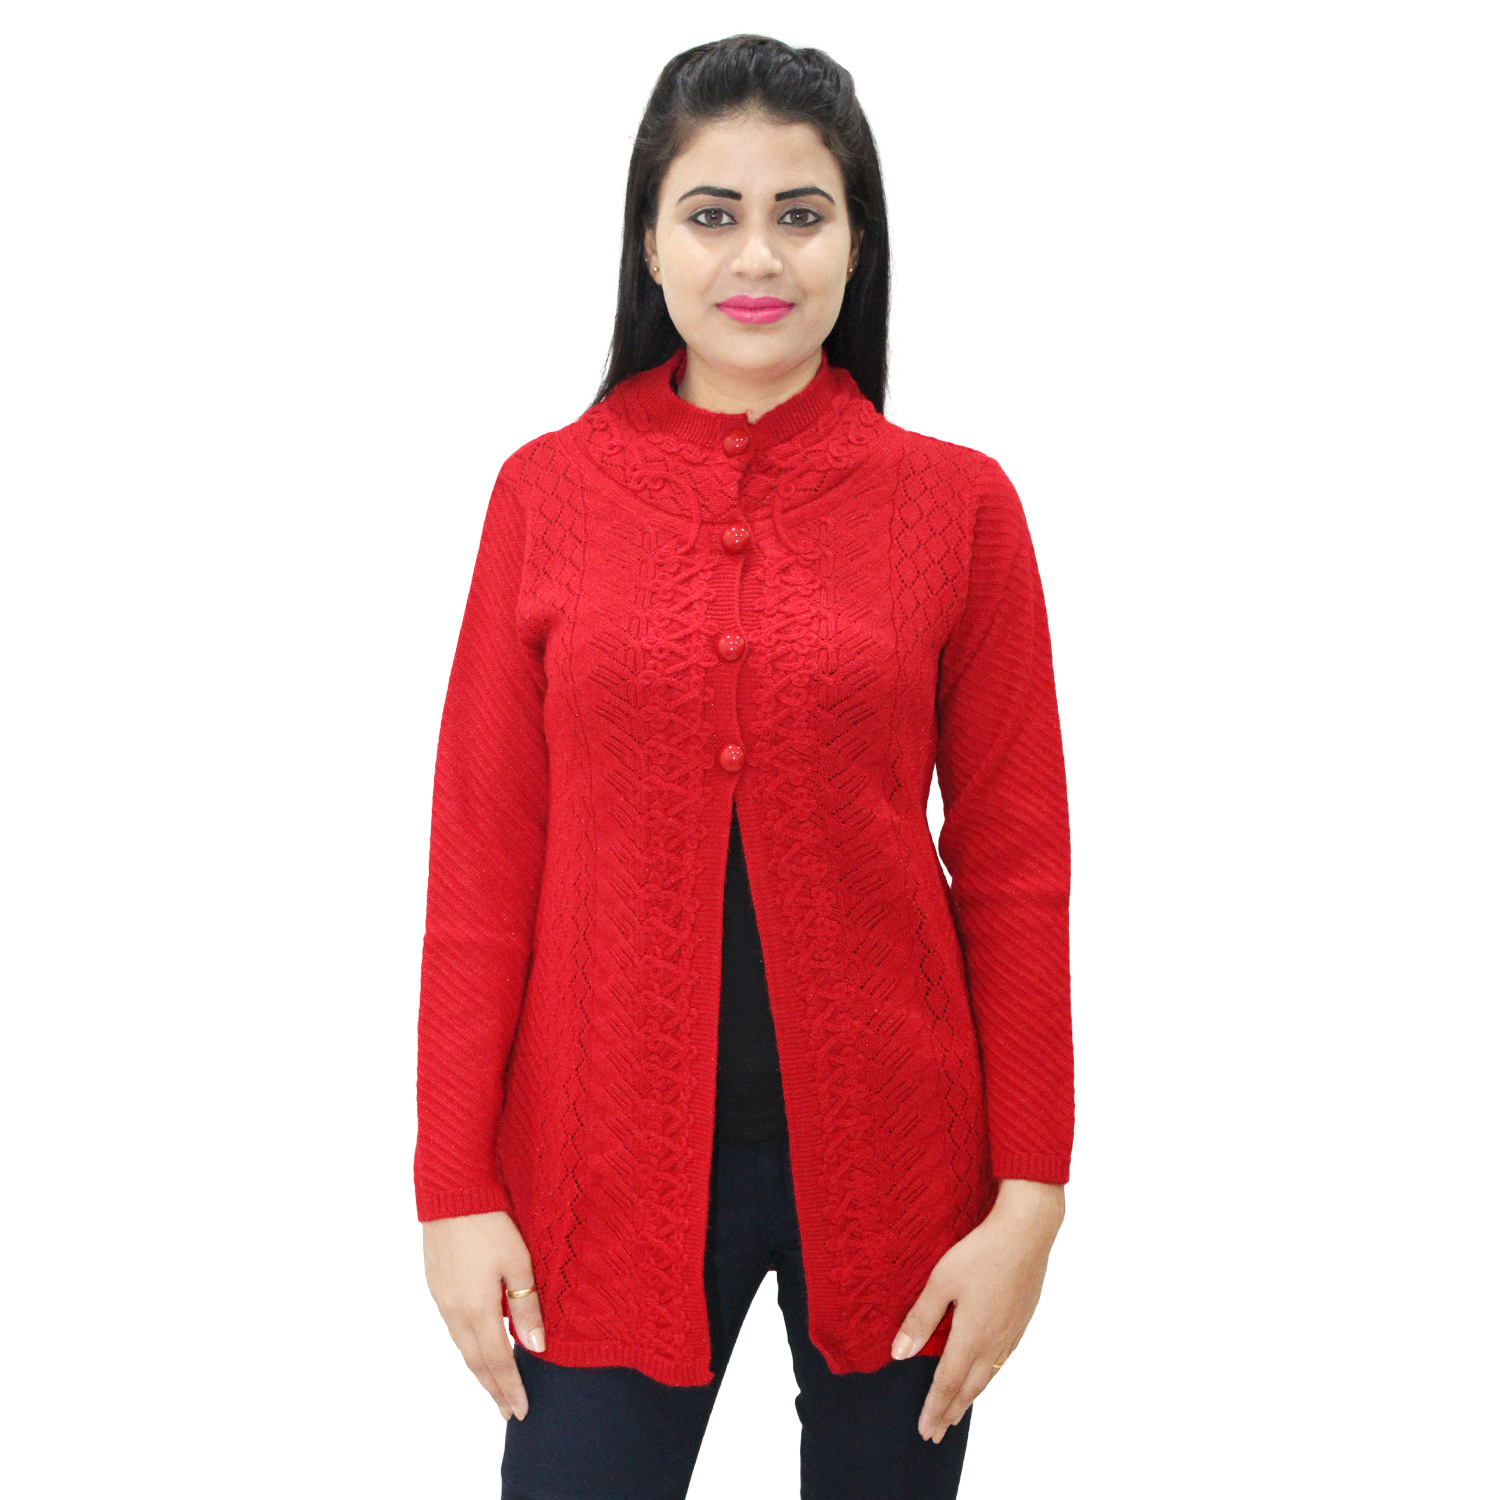 Buy Matelco Women's Red Button Cardigan with Pockets L Online @ ₹1549 ...